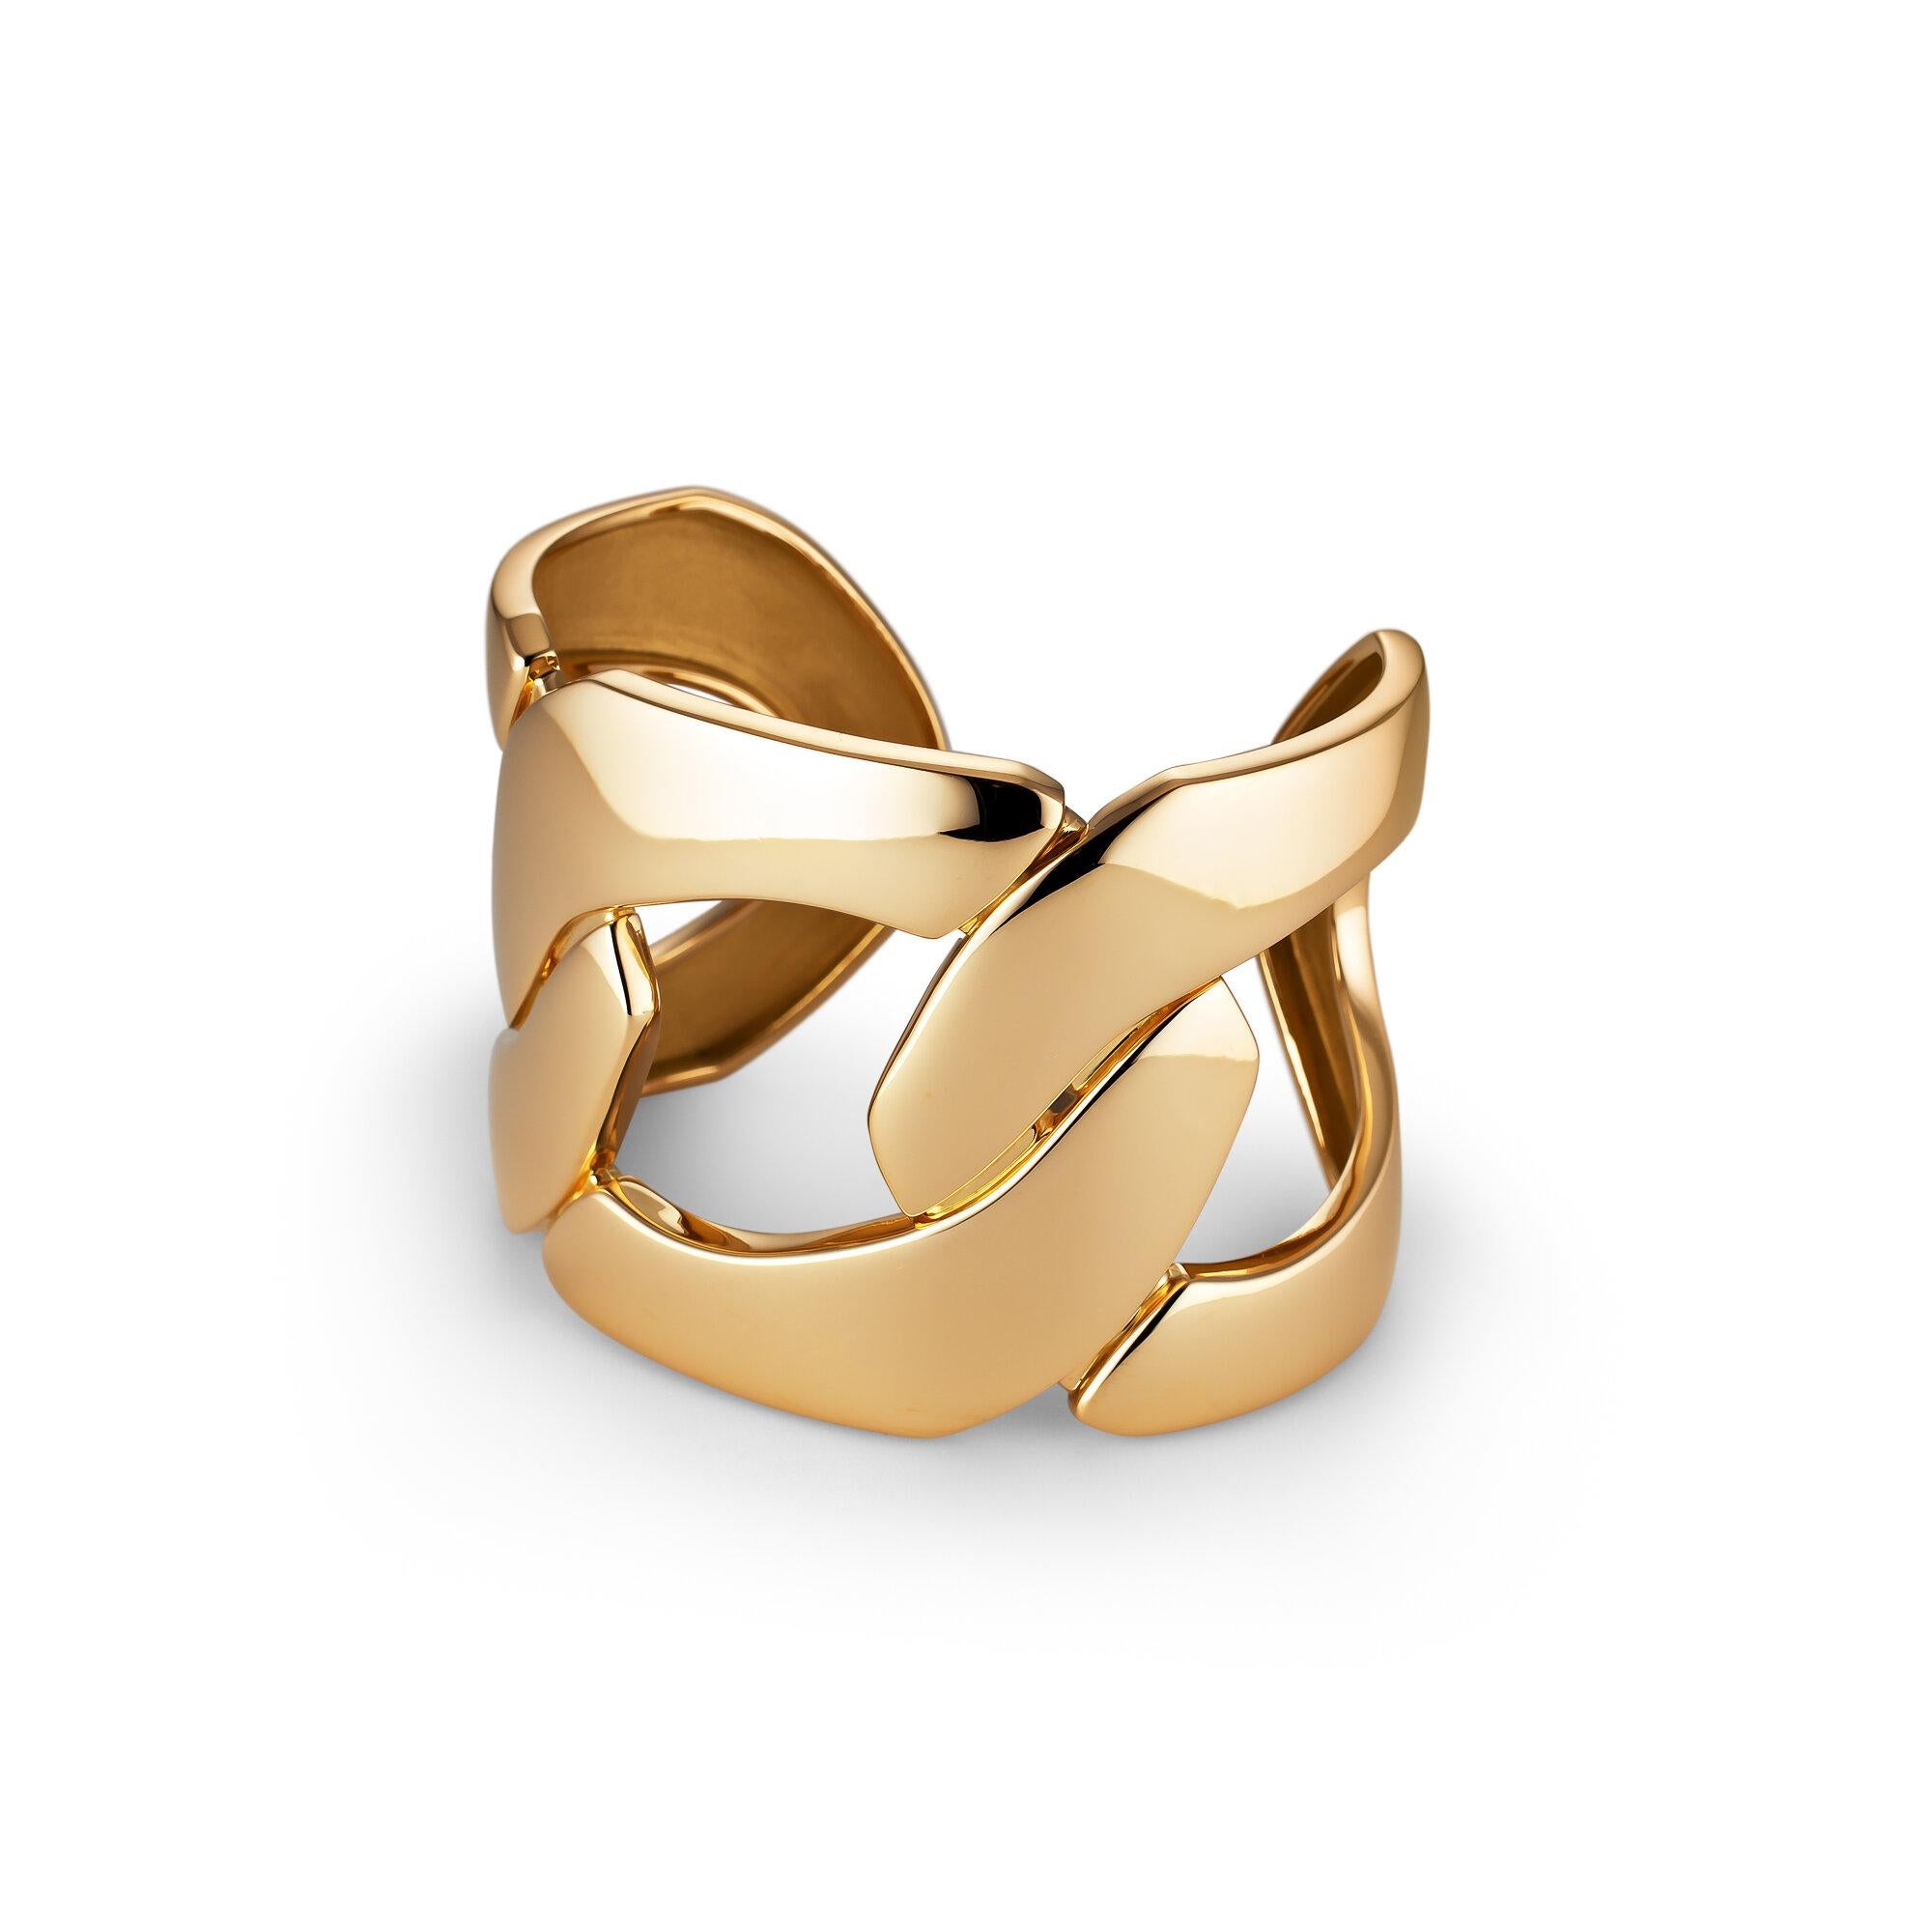 You will be forever linked-in when wearing this chunky Seaman Schepps yellow gold cuff.  With three intertwined and oversized links, this statement cuff is a chic and architecturally strong modern accessory.  18 karat gold.   Seaman Schepps